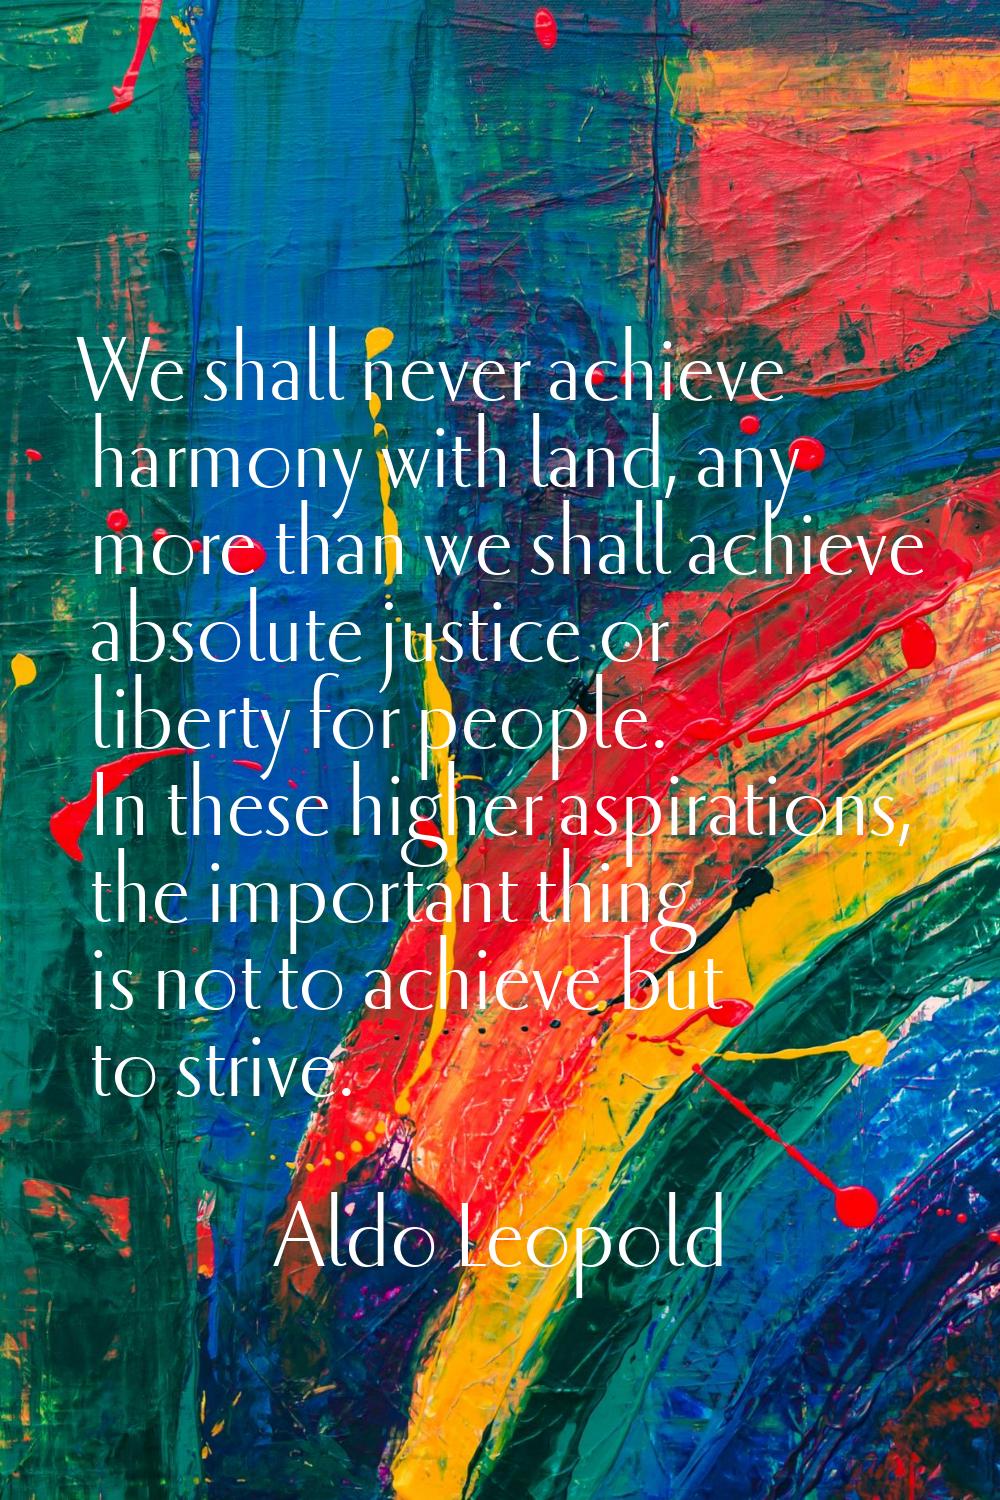 We shall never achieve harmony with land, any more than we shall achieve absolute justice or libert